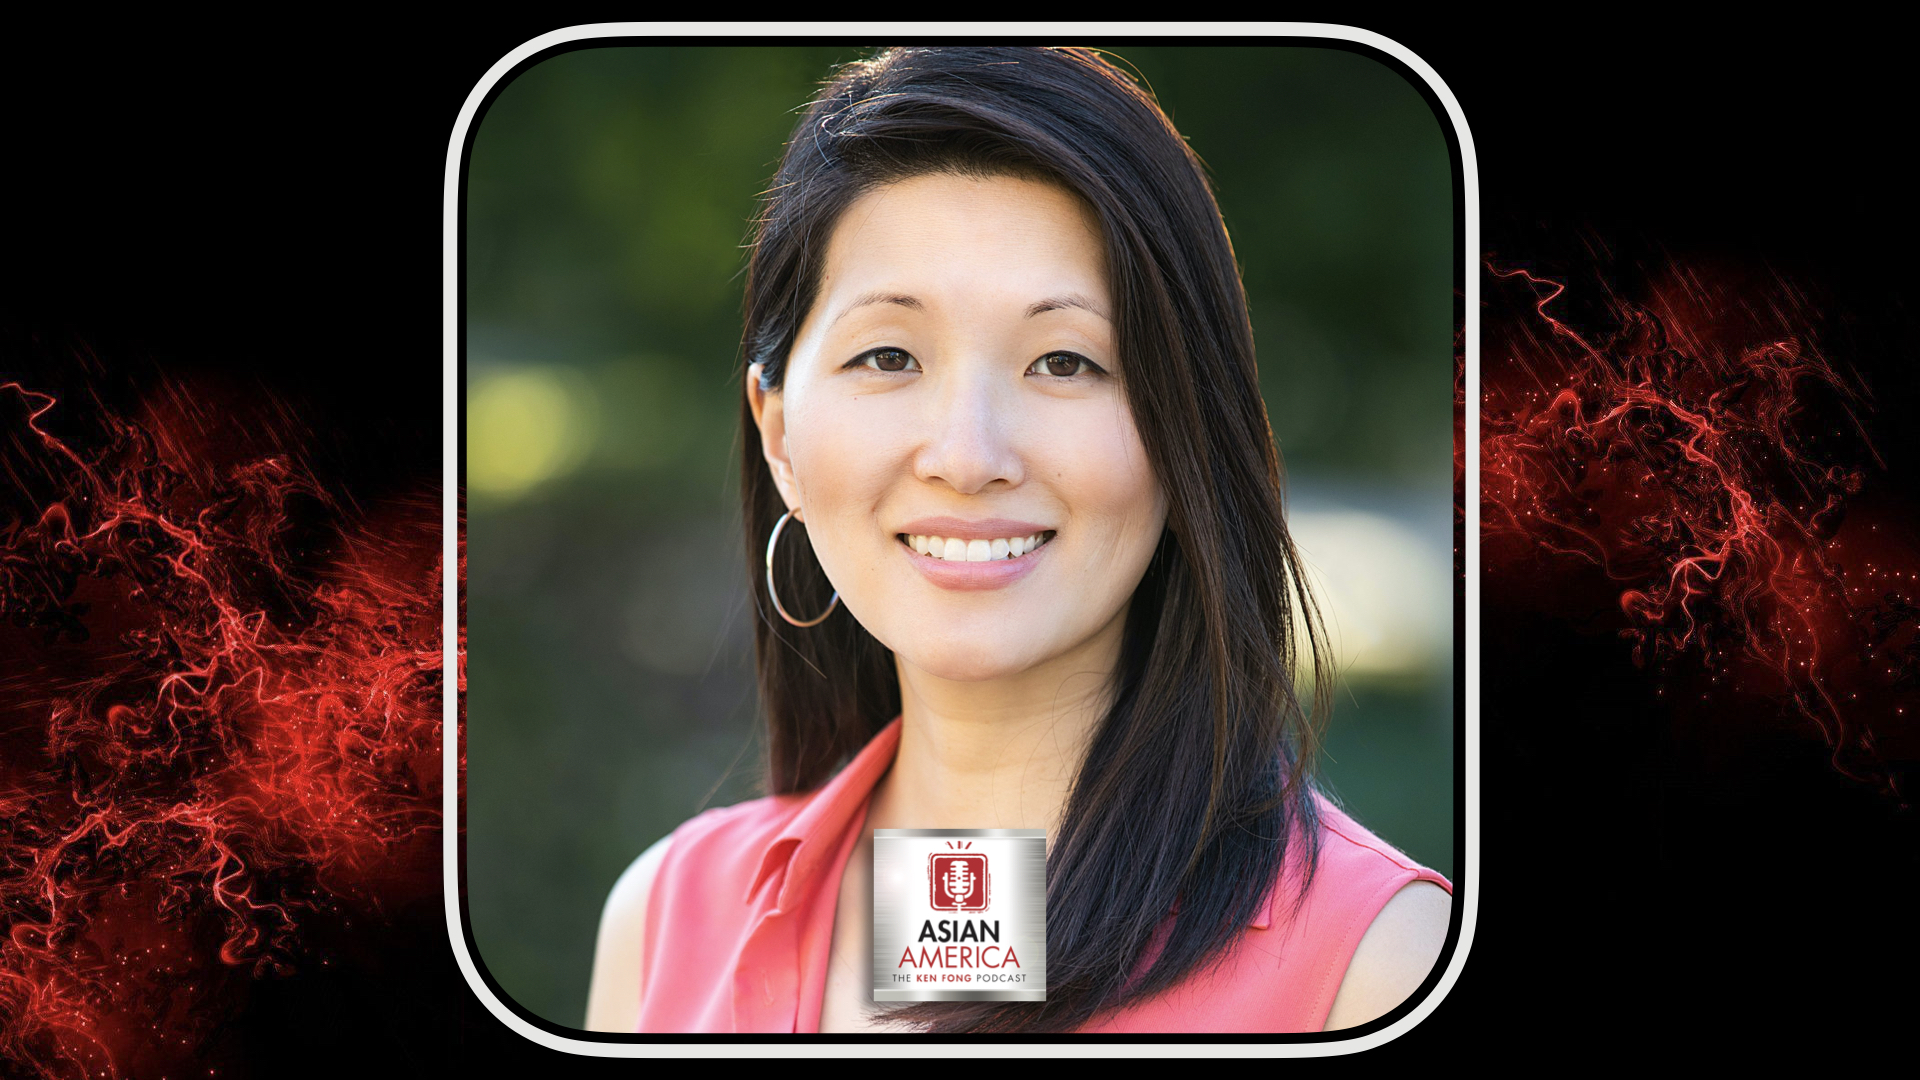 Ep 438: Dr. Jane Hong On How Post-1965 Asian Immigration Has Changed US Evangelical Institutions & Politics